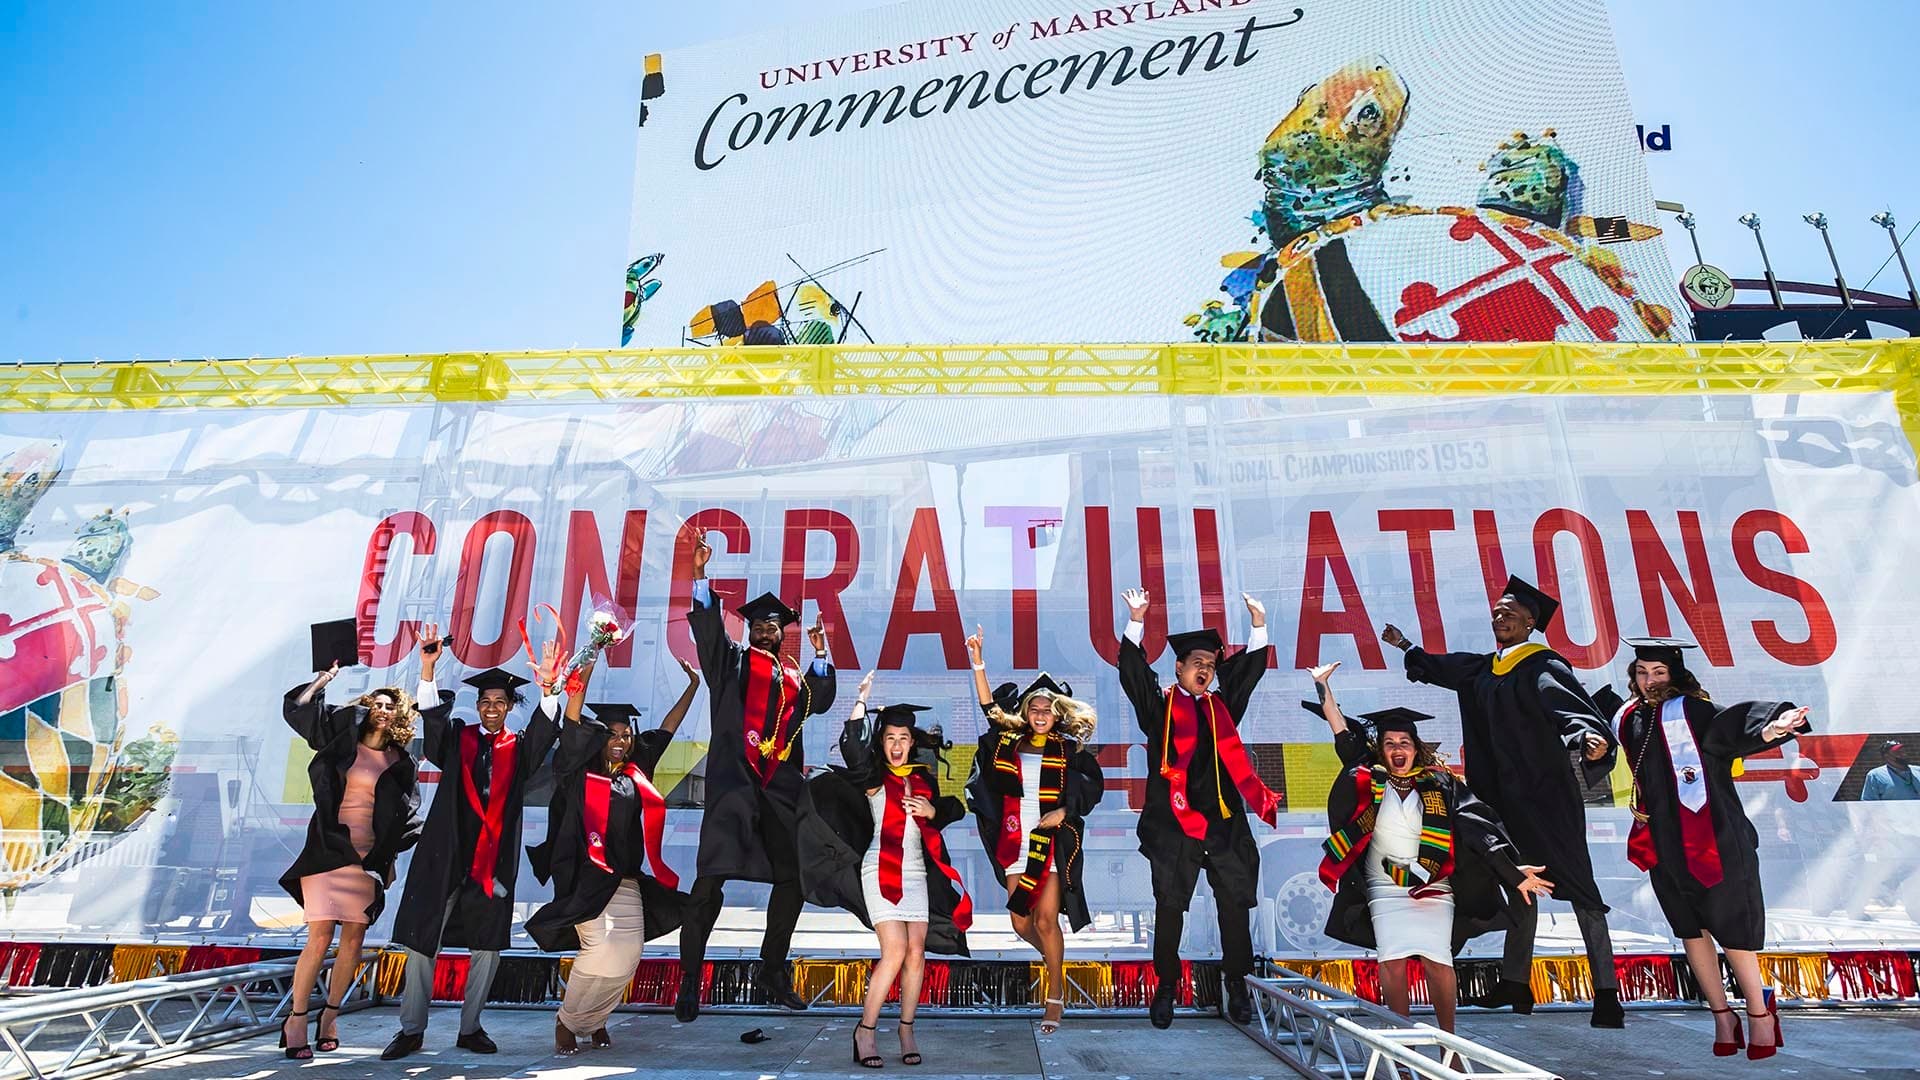 Graduates jumping in front of "Congratulations" sign